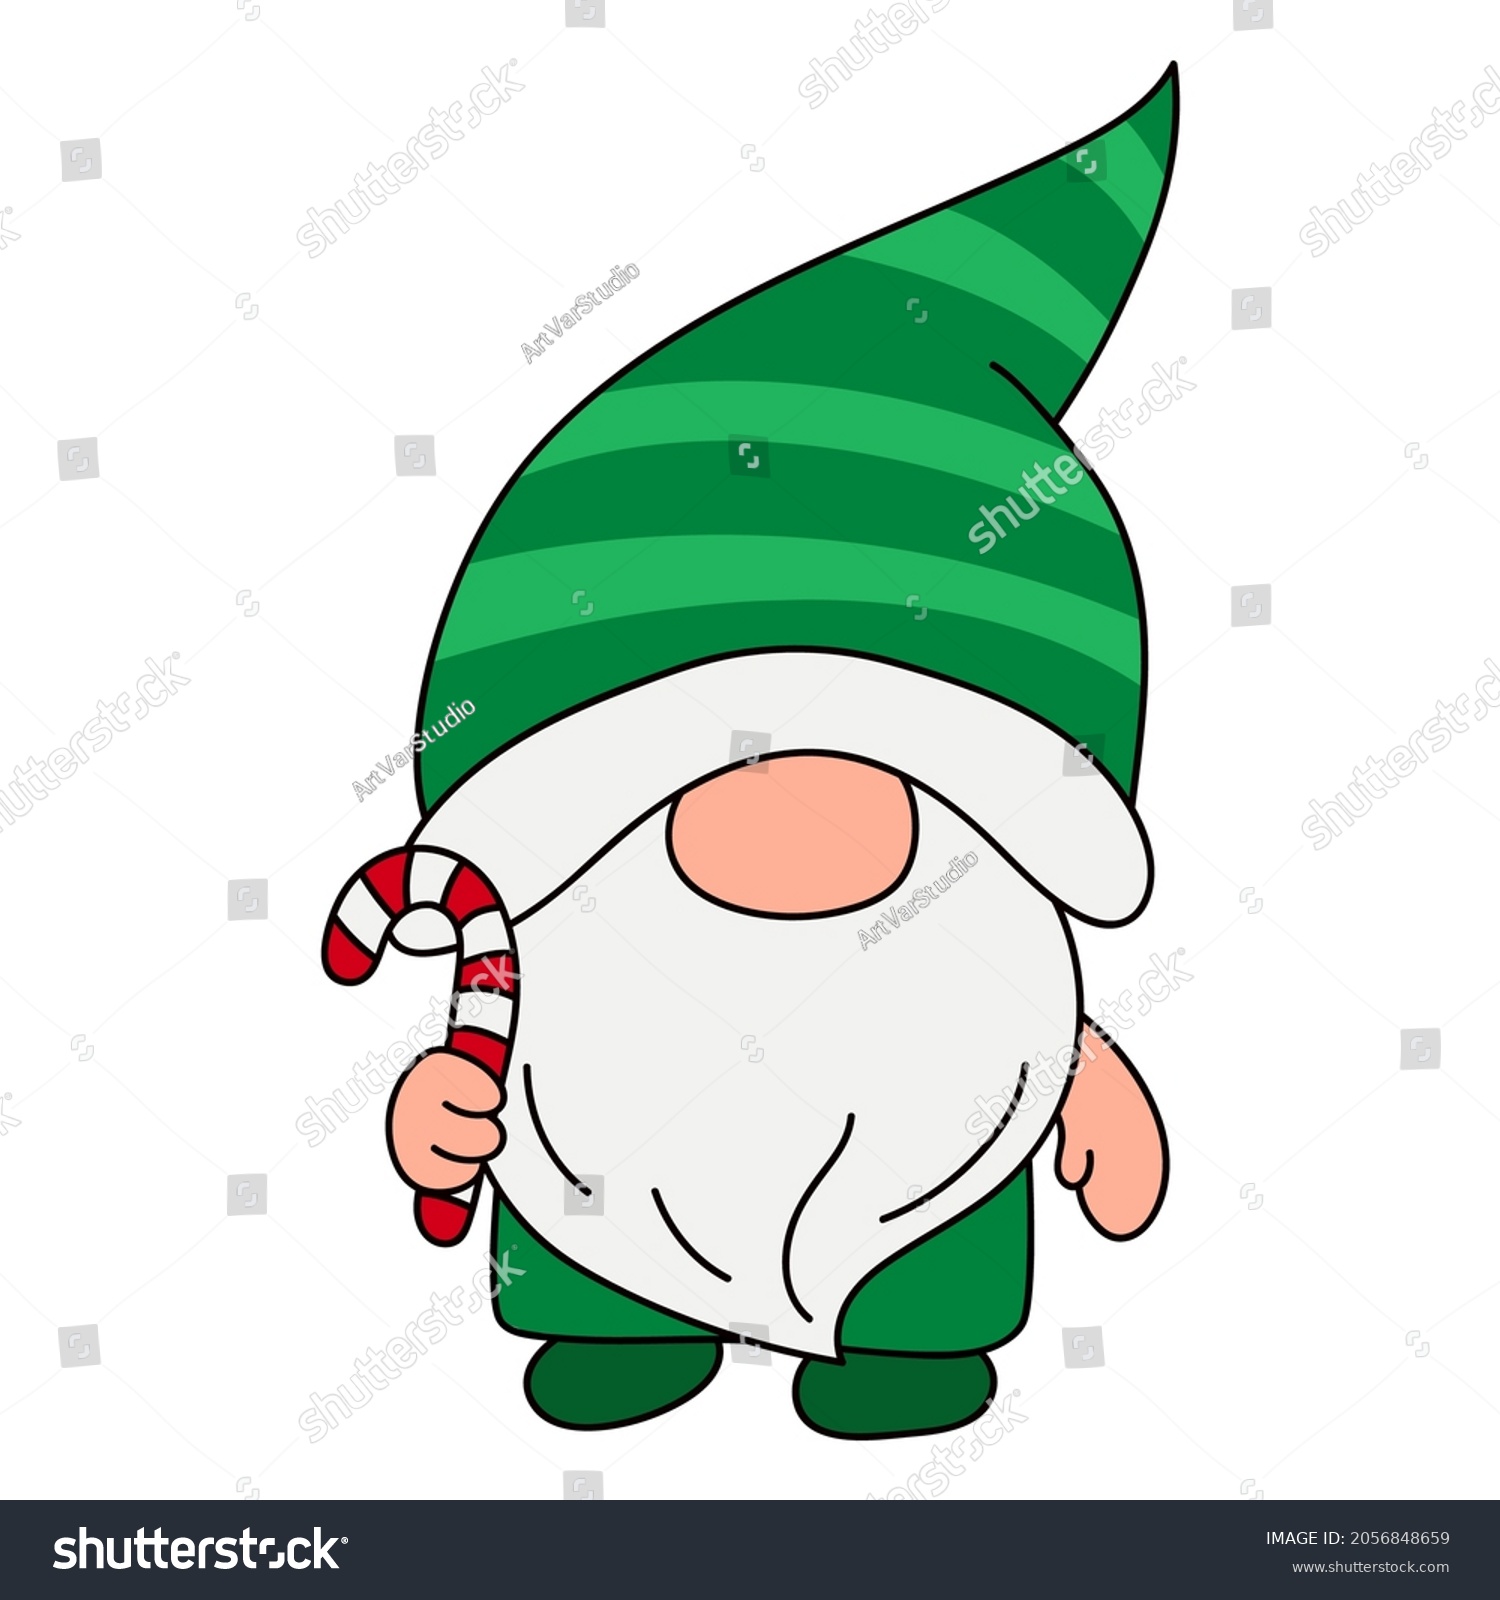 SVG of Christmas gnomes cute illustration. Gnome clipart Festive gnome vector illustration for Christmas holiday.  Scandi xmas gnomes. svg